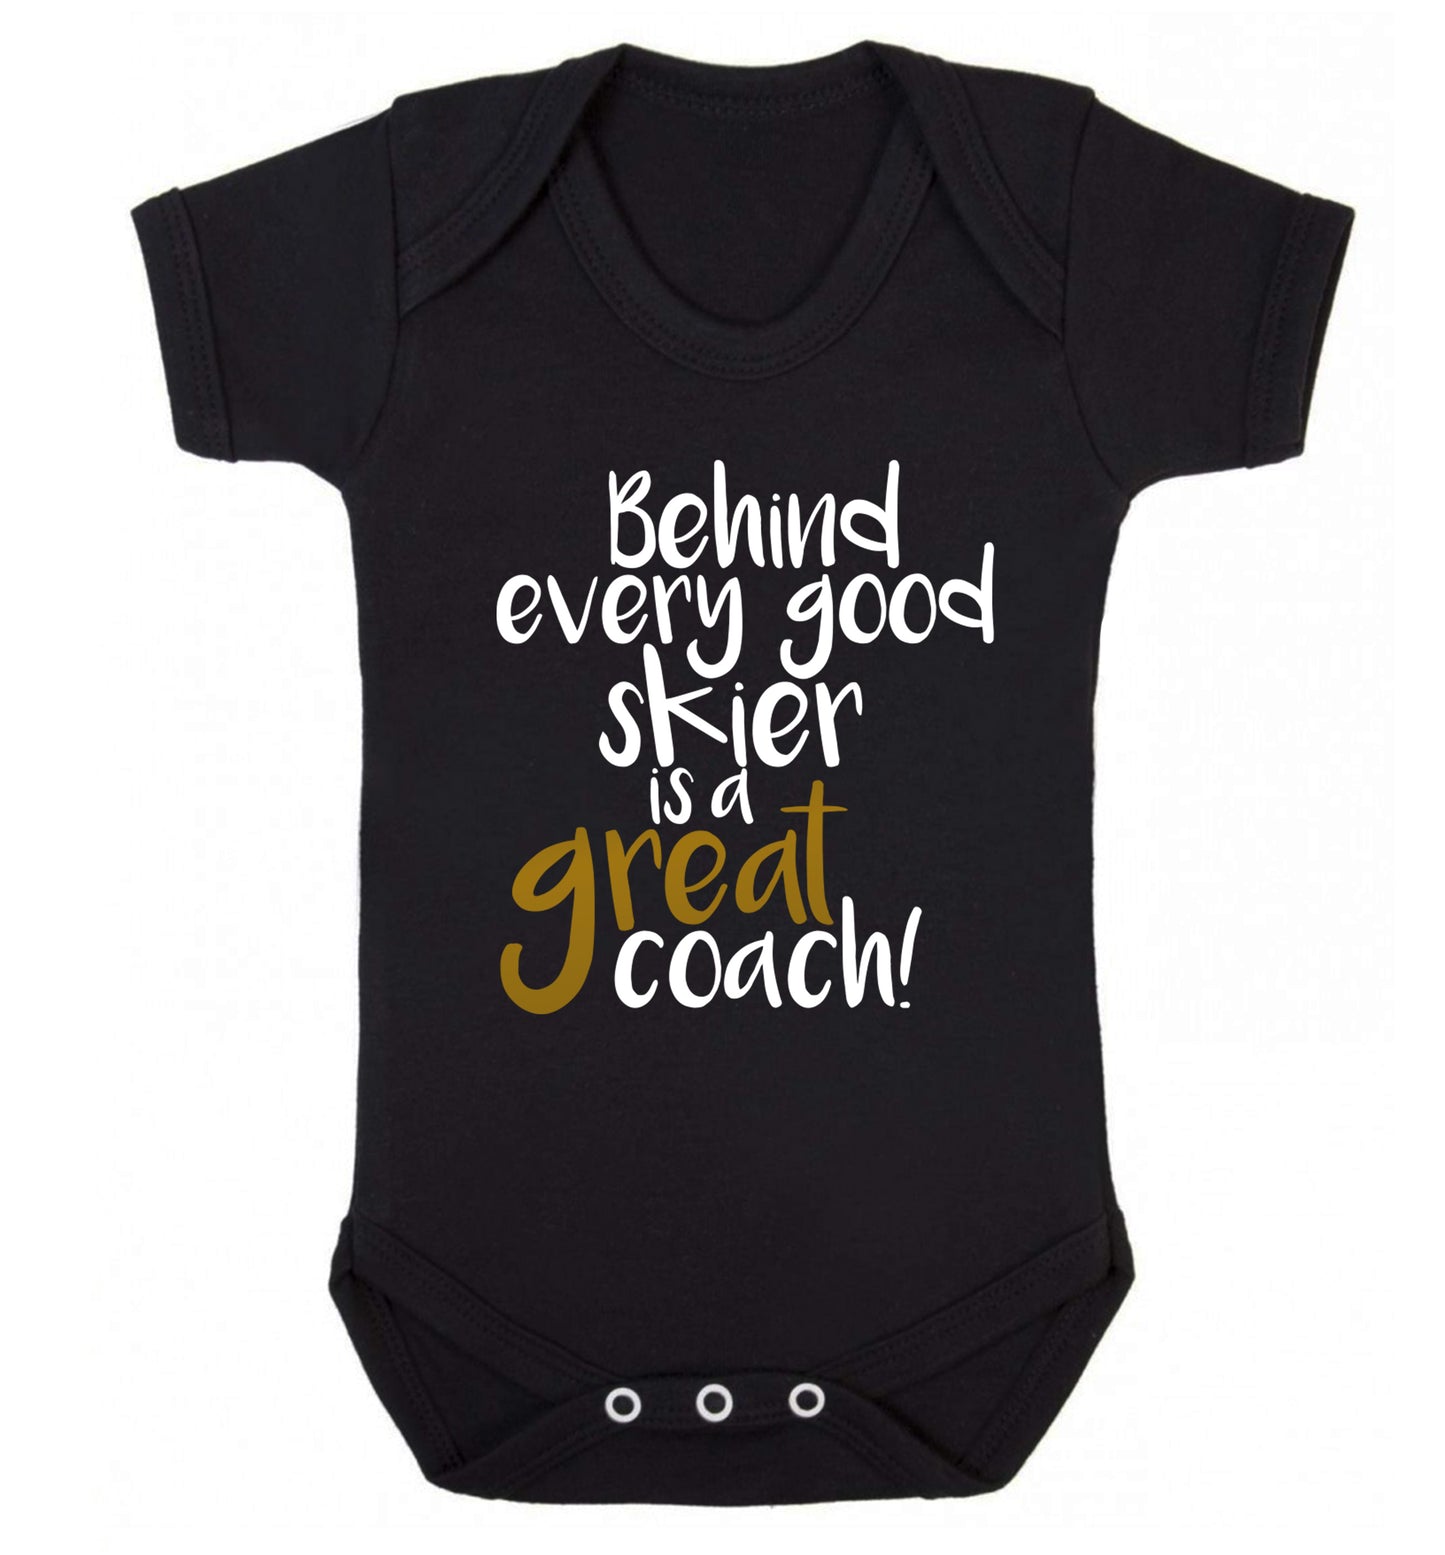 Behind every good skier is a great coach! Baby Vest black 18-24 months